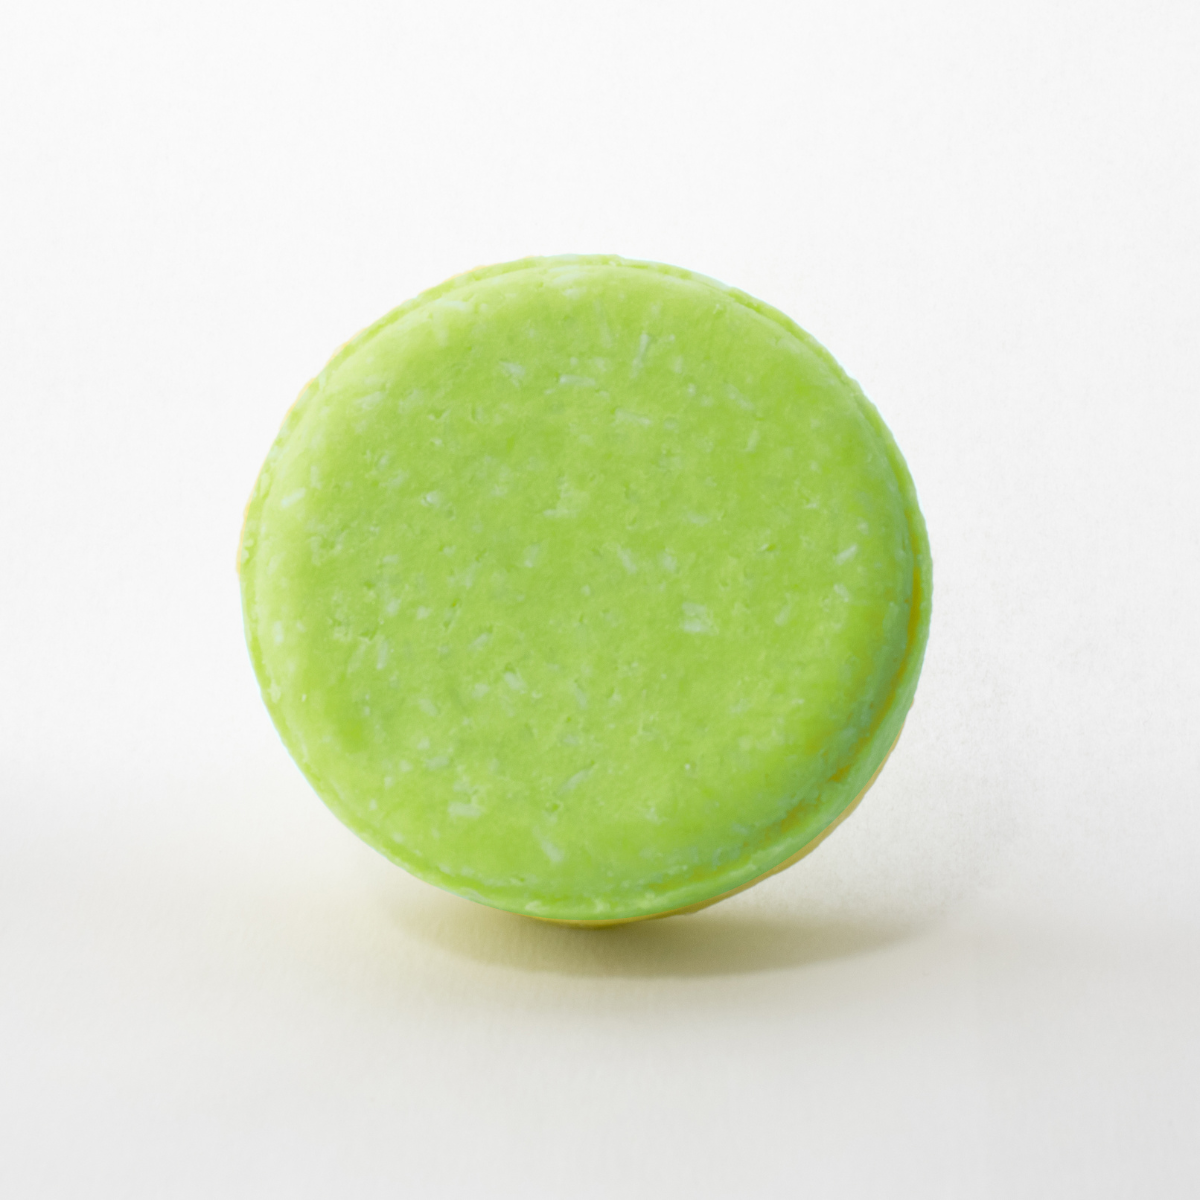 a close up of a green round object on a white surface